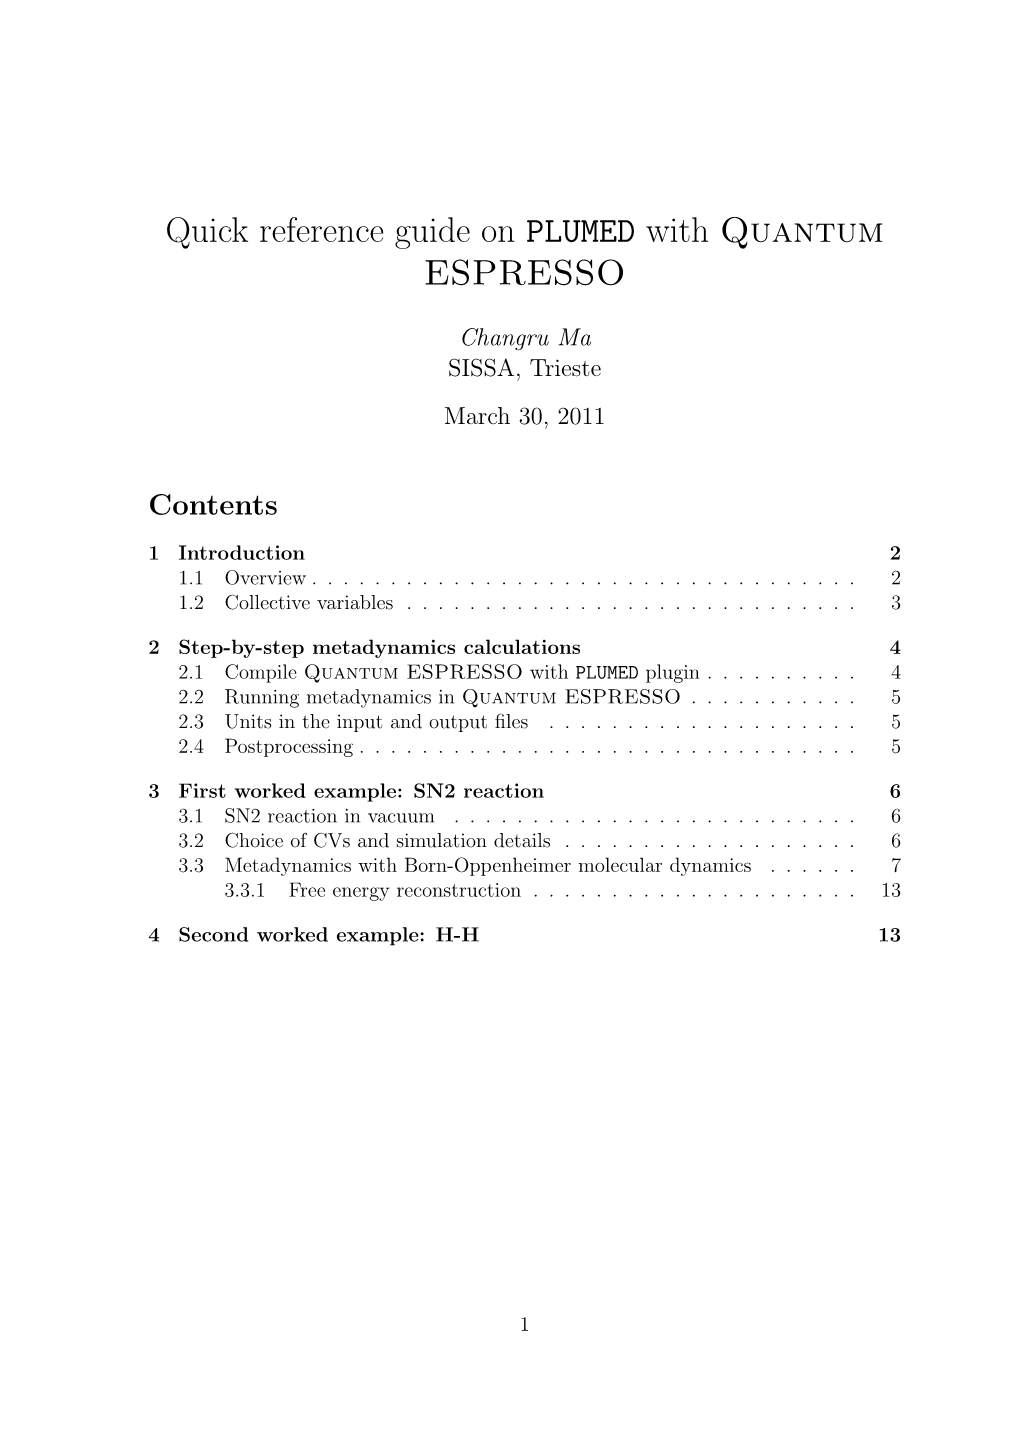 Quick Reference Guide on PLUMED with Quantum ESPRESSO